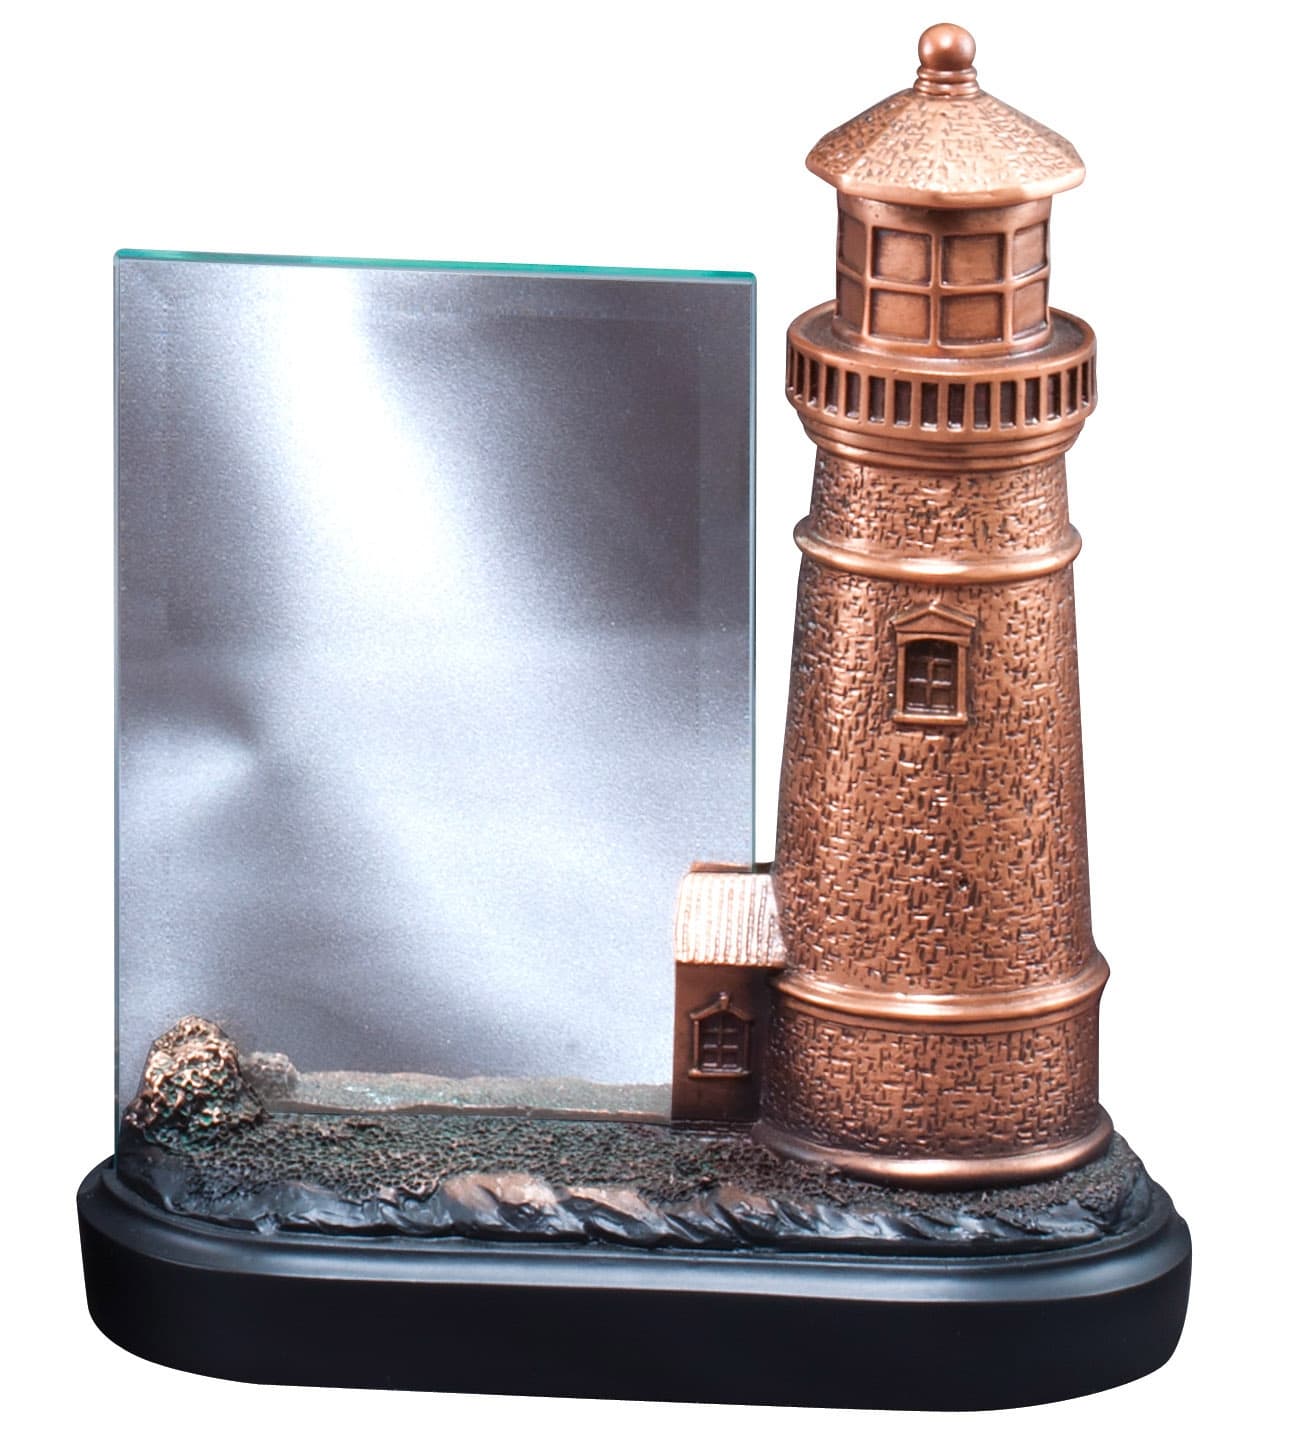 This is a Lighthouse Statue Award. The right side features a bronze colored lighthouse, while the left side has a 4x6 glass plate that can be personalized. It's all mounted on a black base.